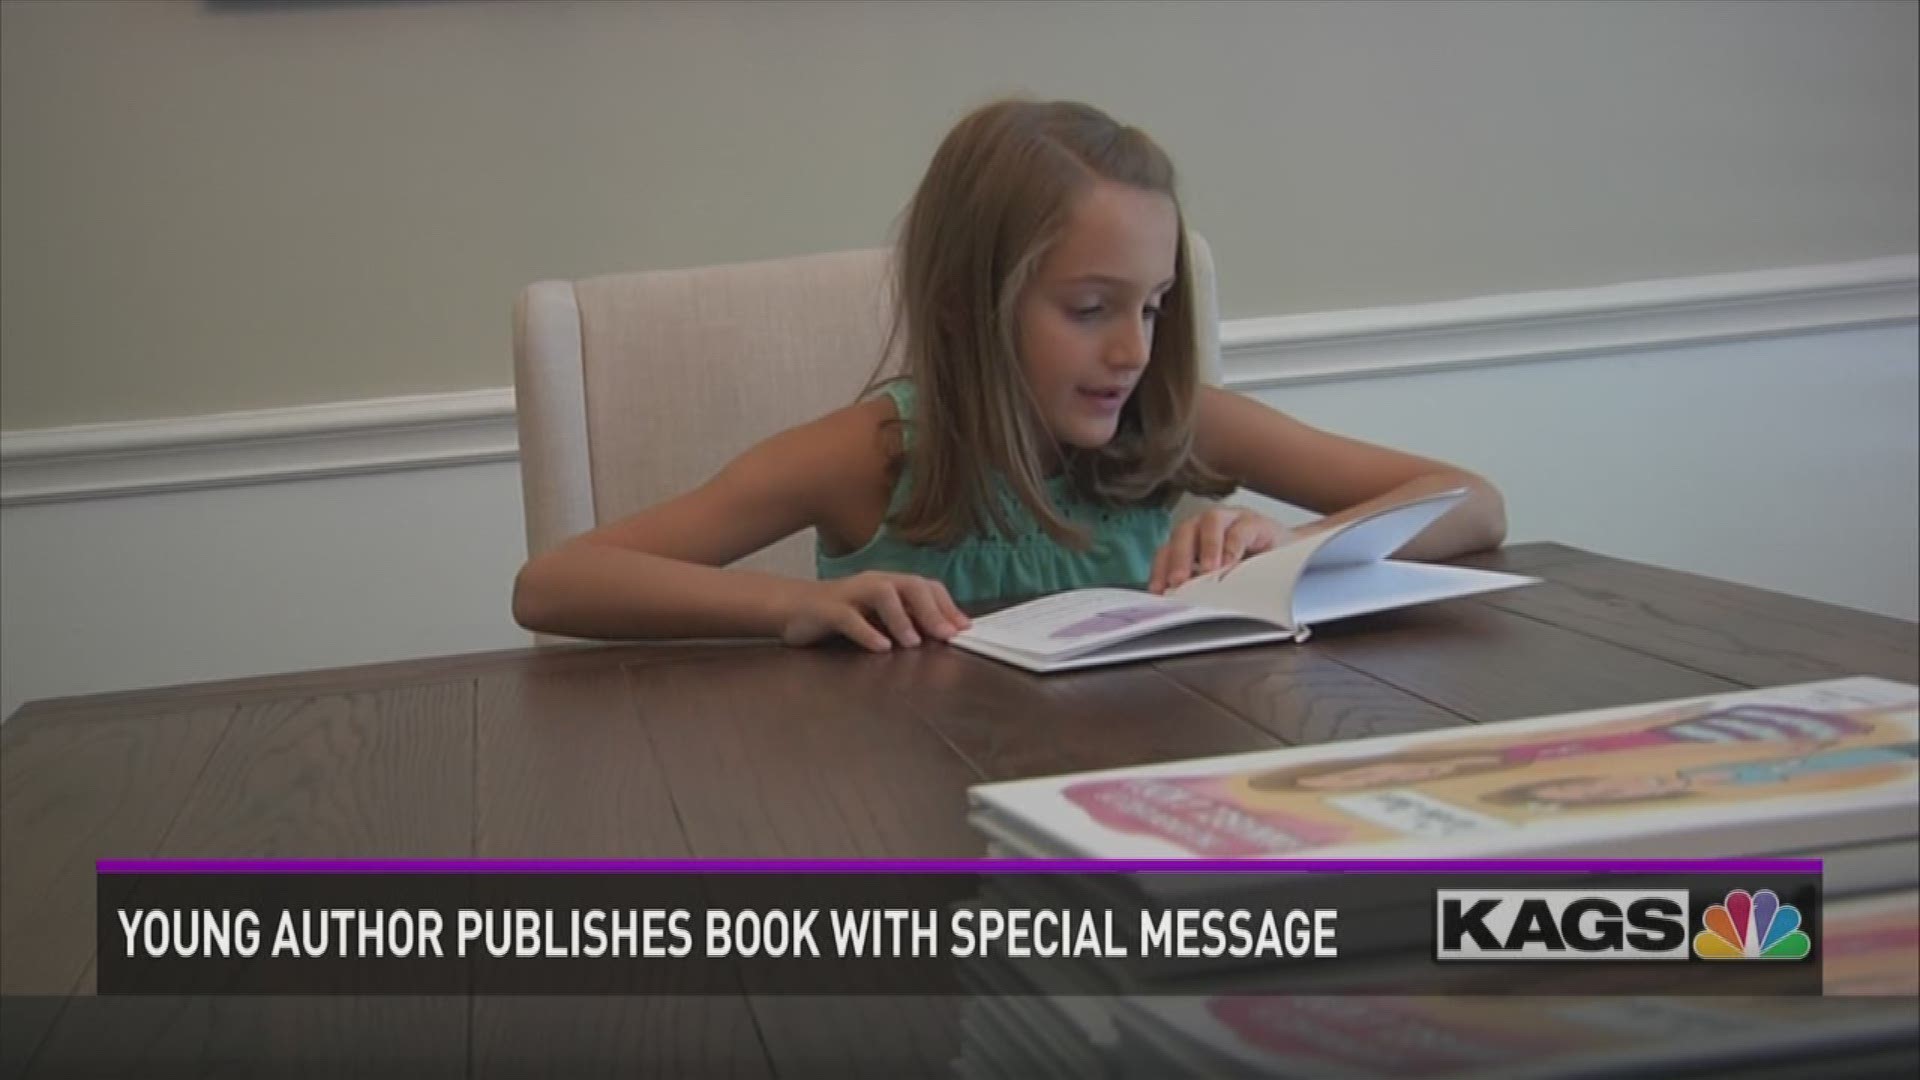 One local author is proving that talent comes in all shapes, sizes and ages.